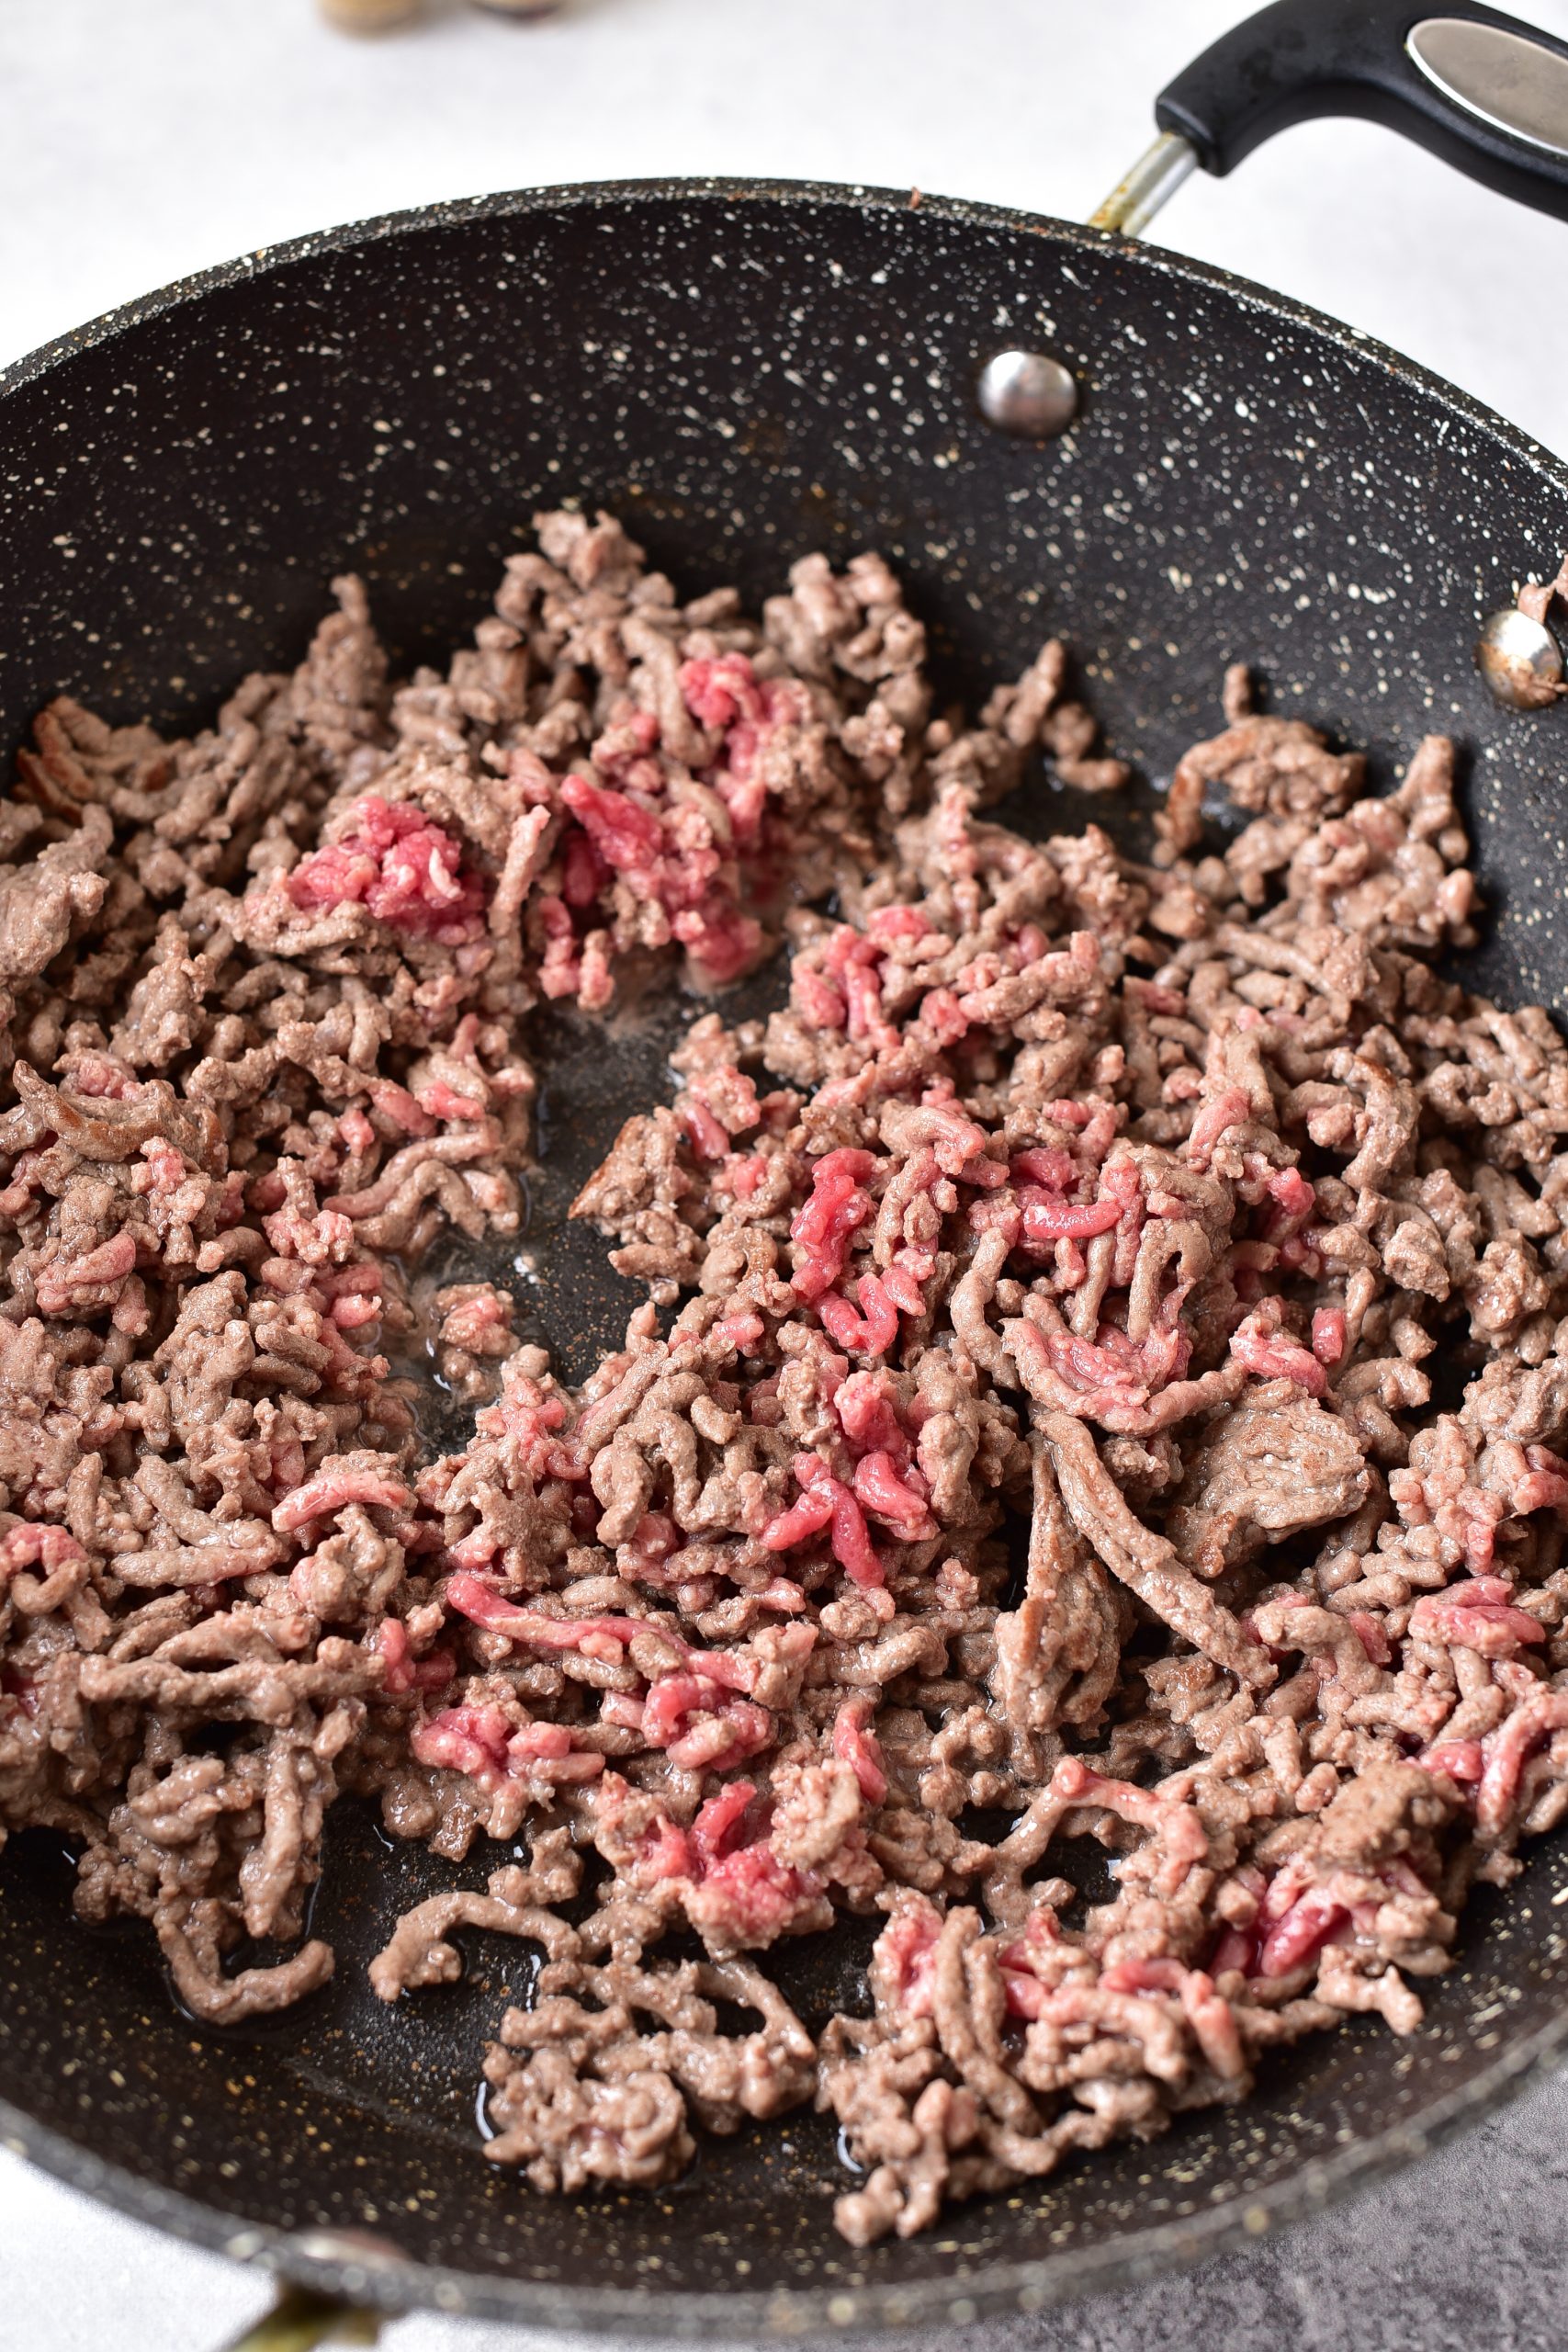 Place the ground beef in a skillet, and saute until completely browned. 